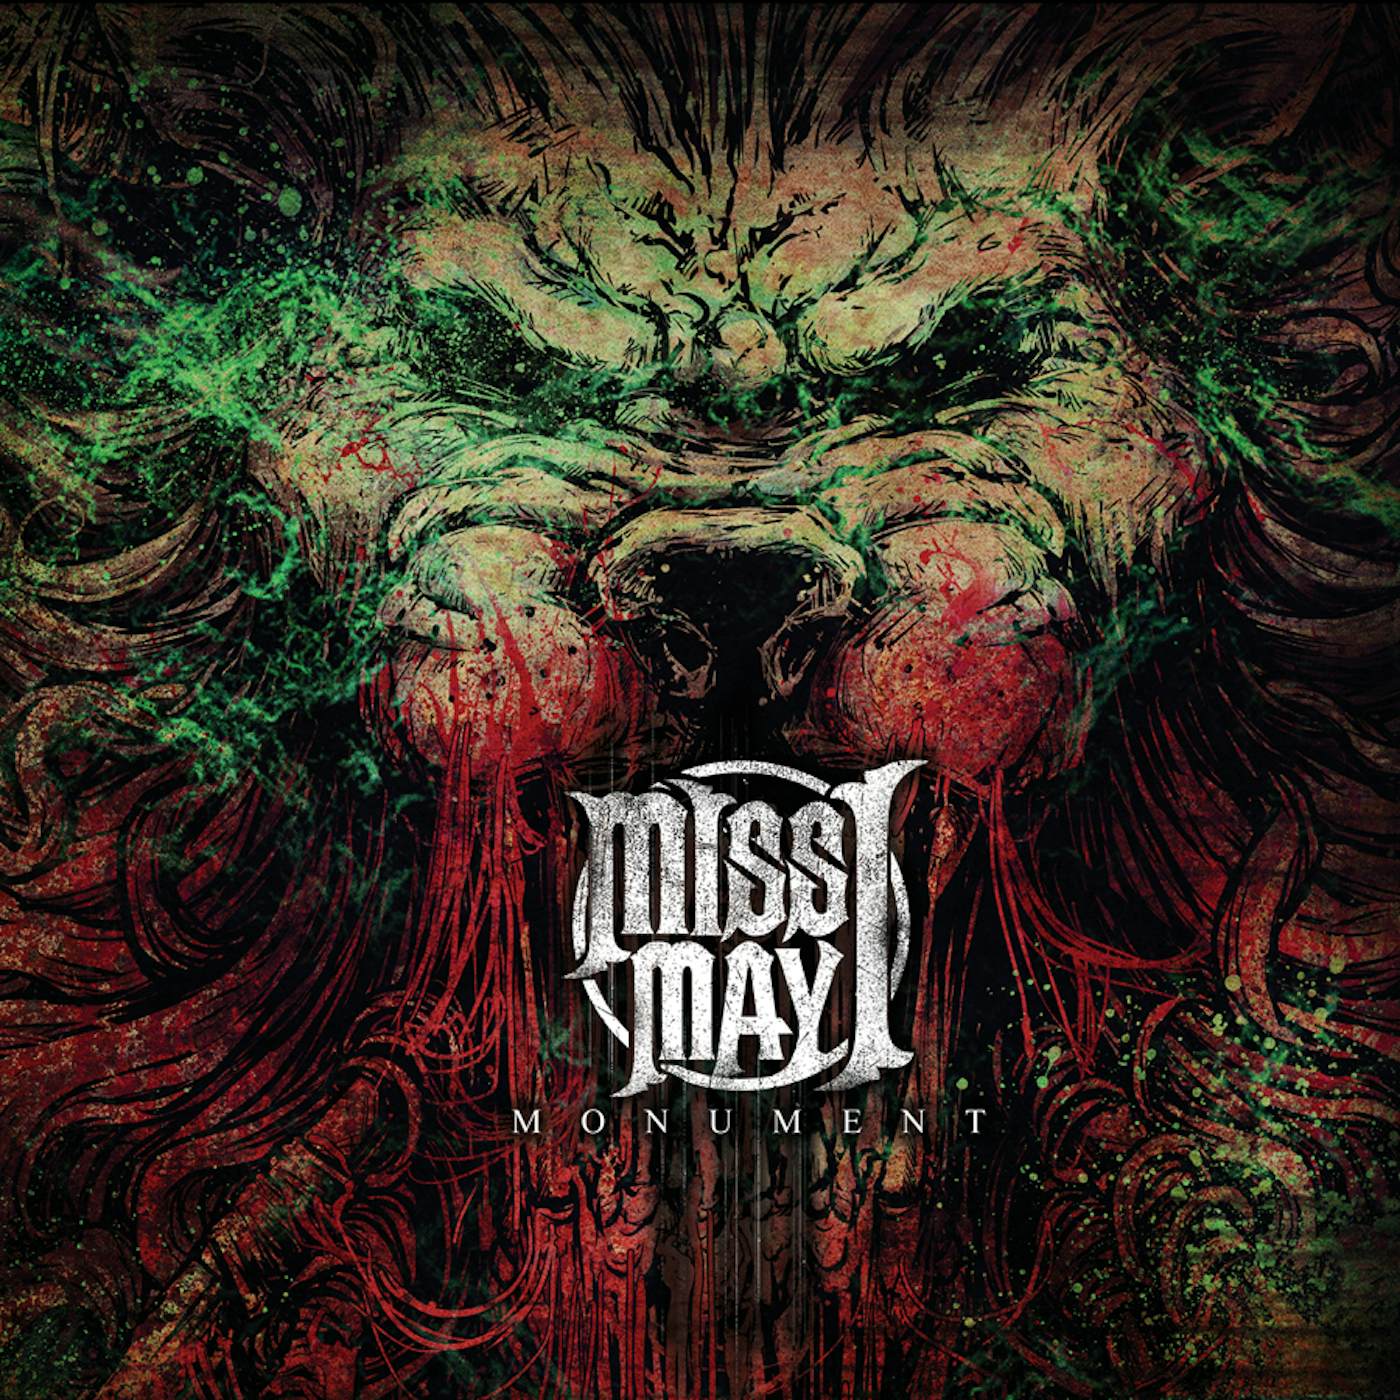 Miss May I - 'Curse of Existence' Red Transparent Vinyl